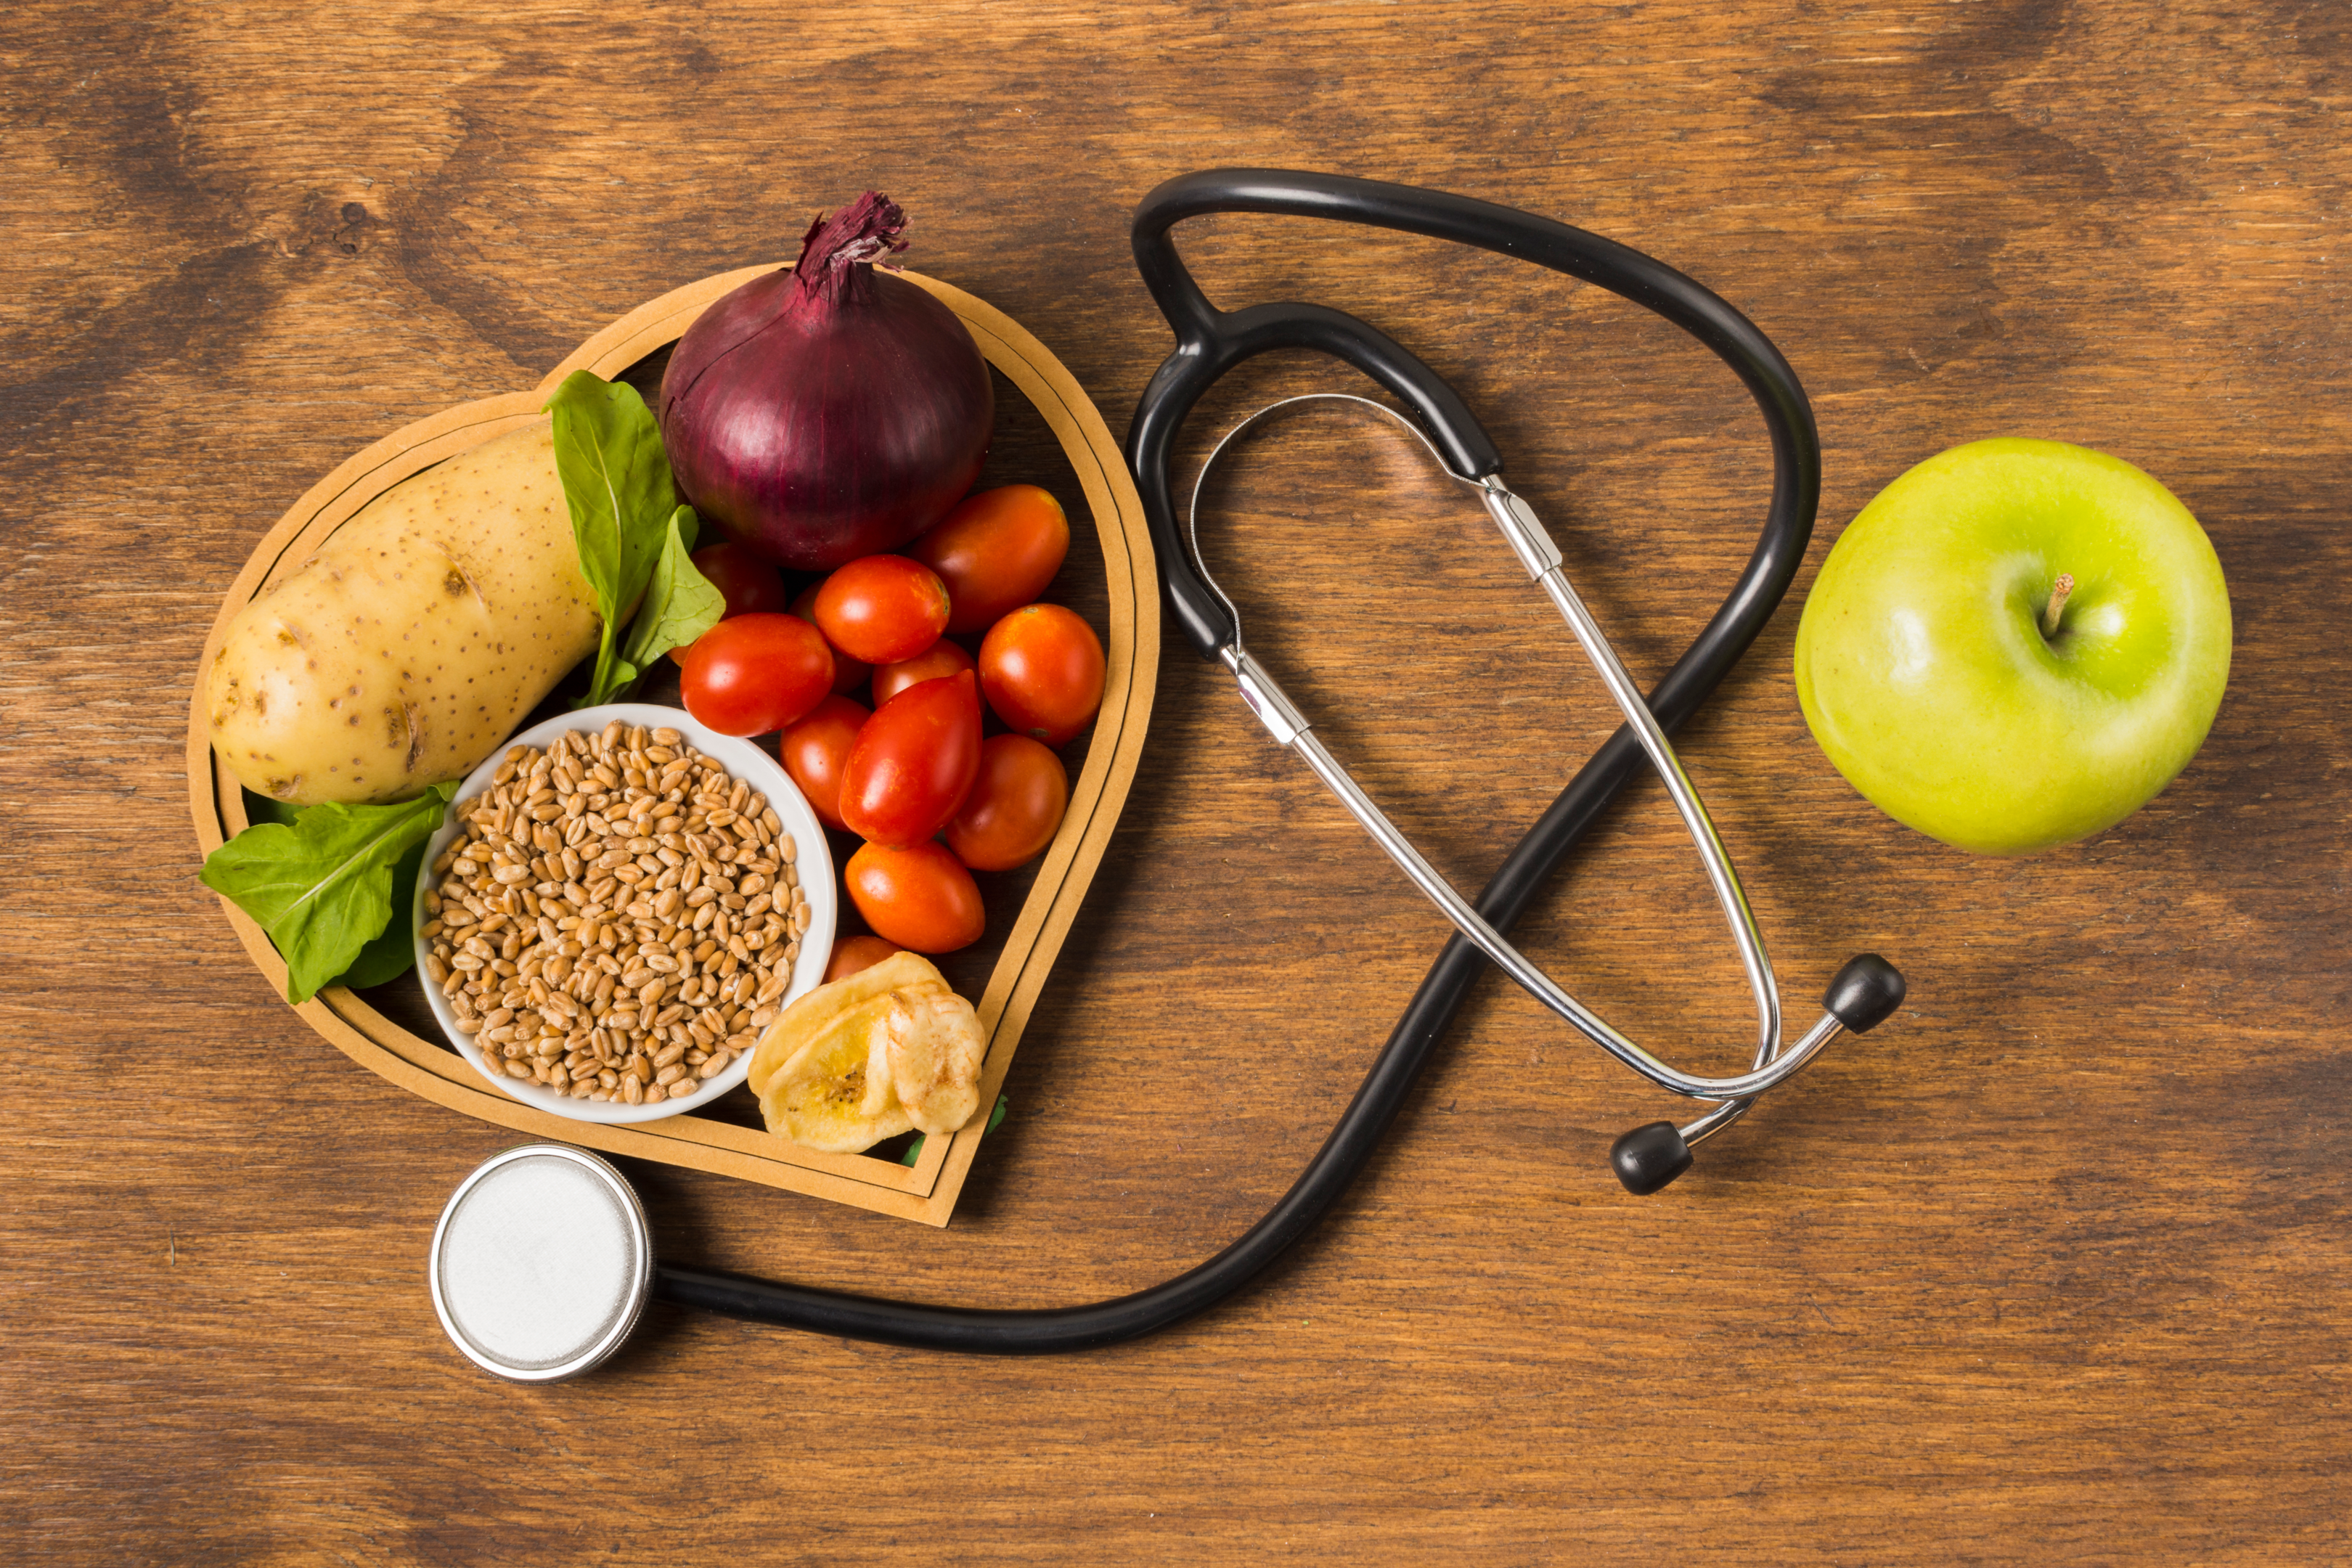 Food is an integral part of any blood pressure management program.